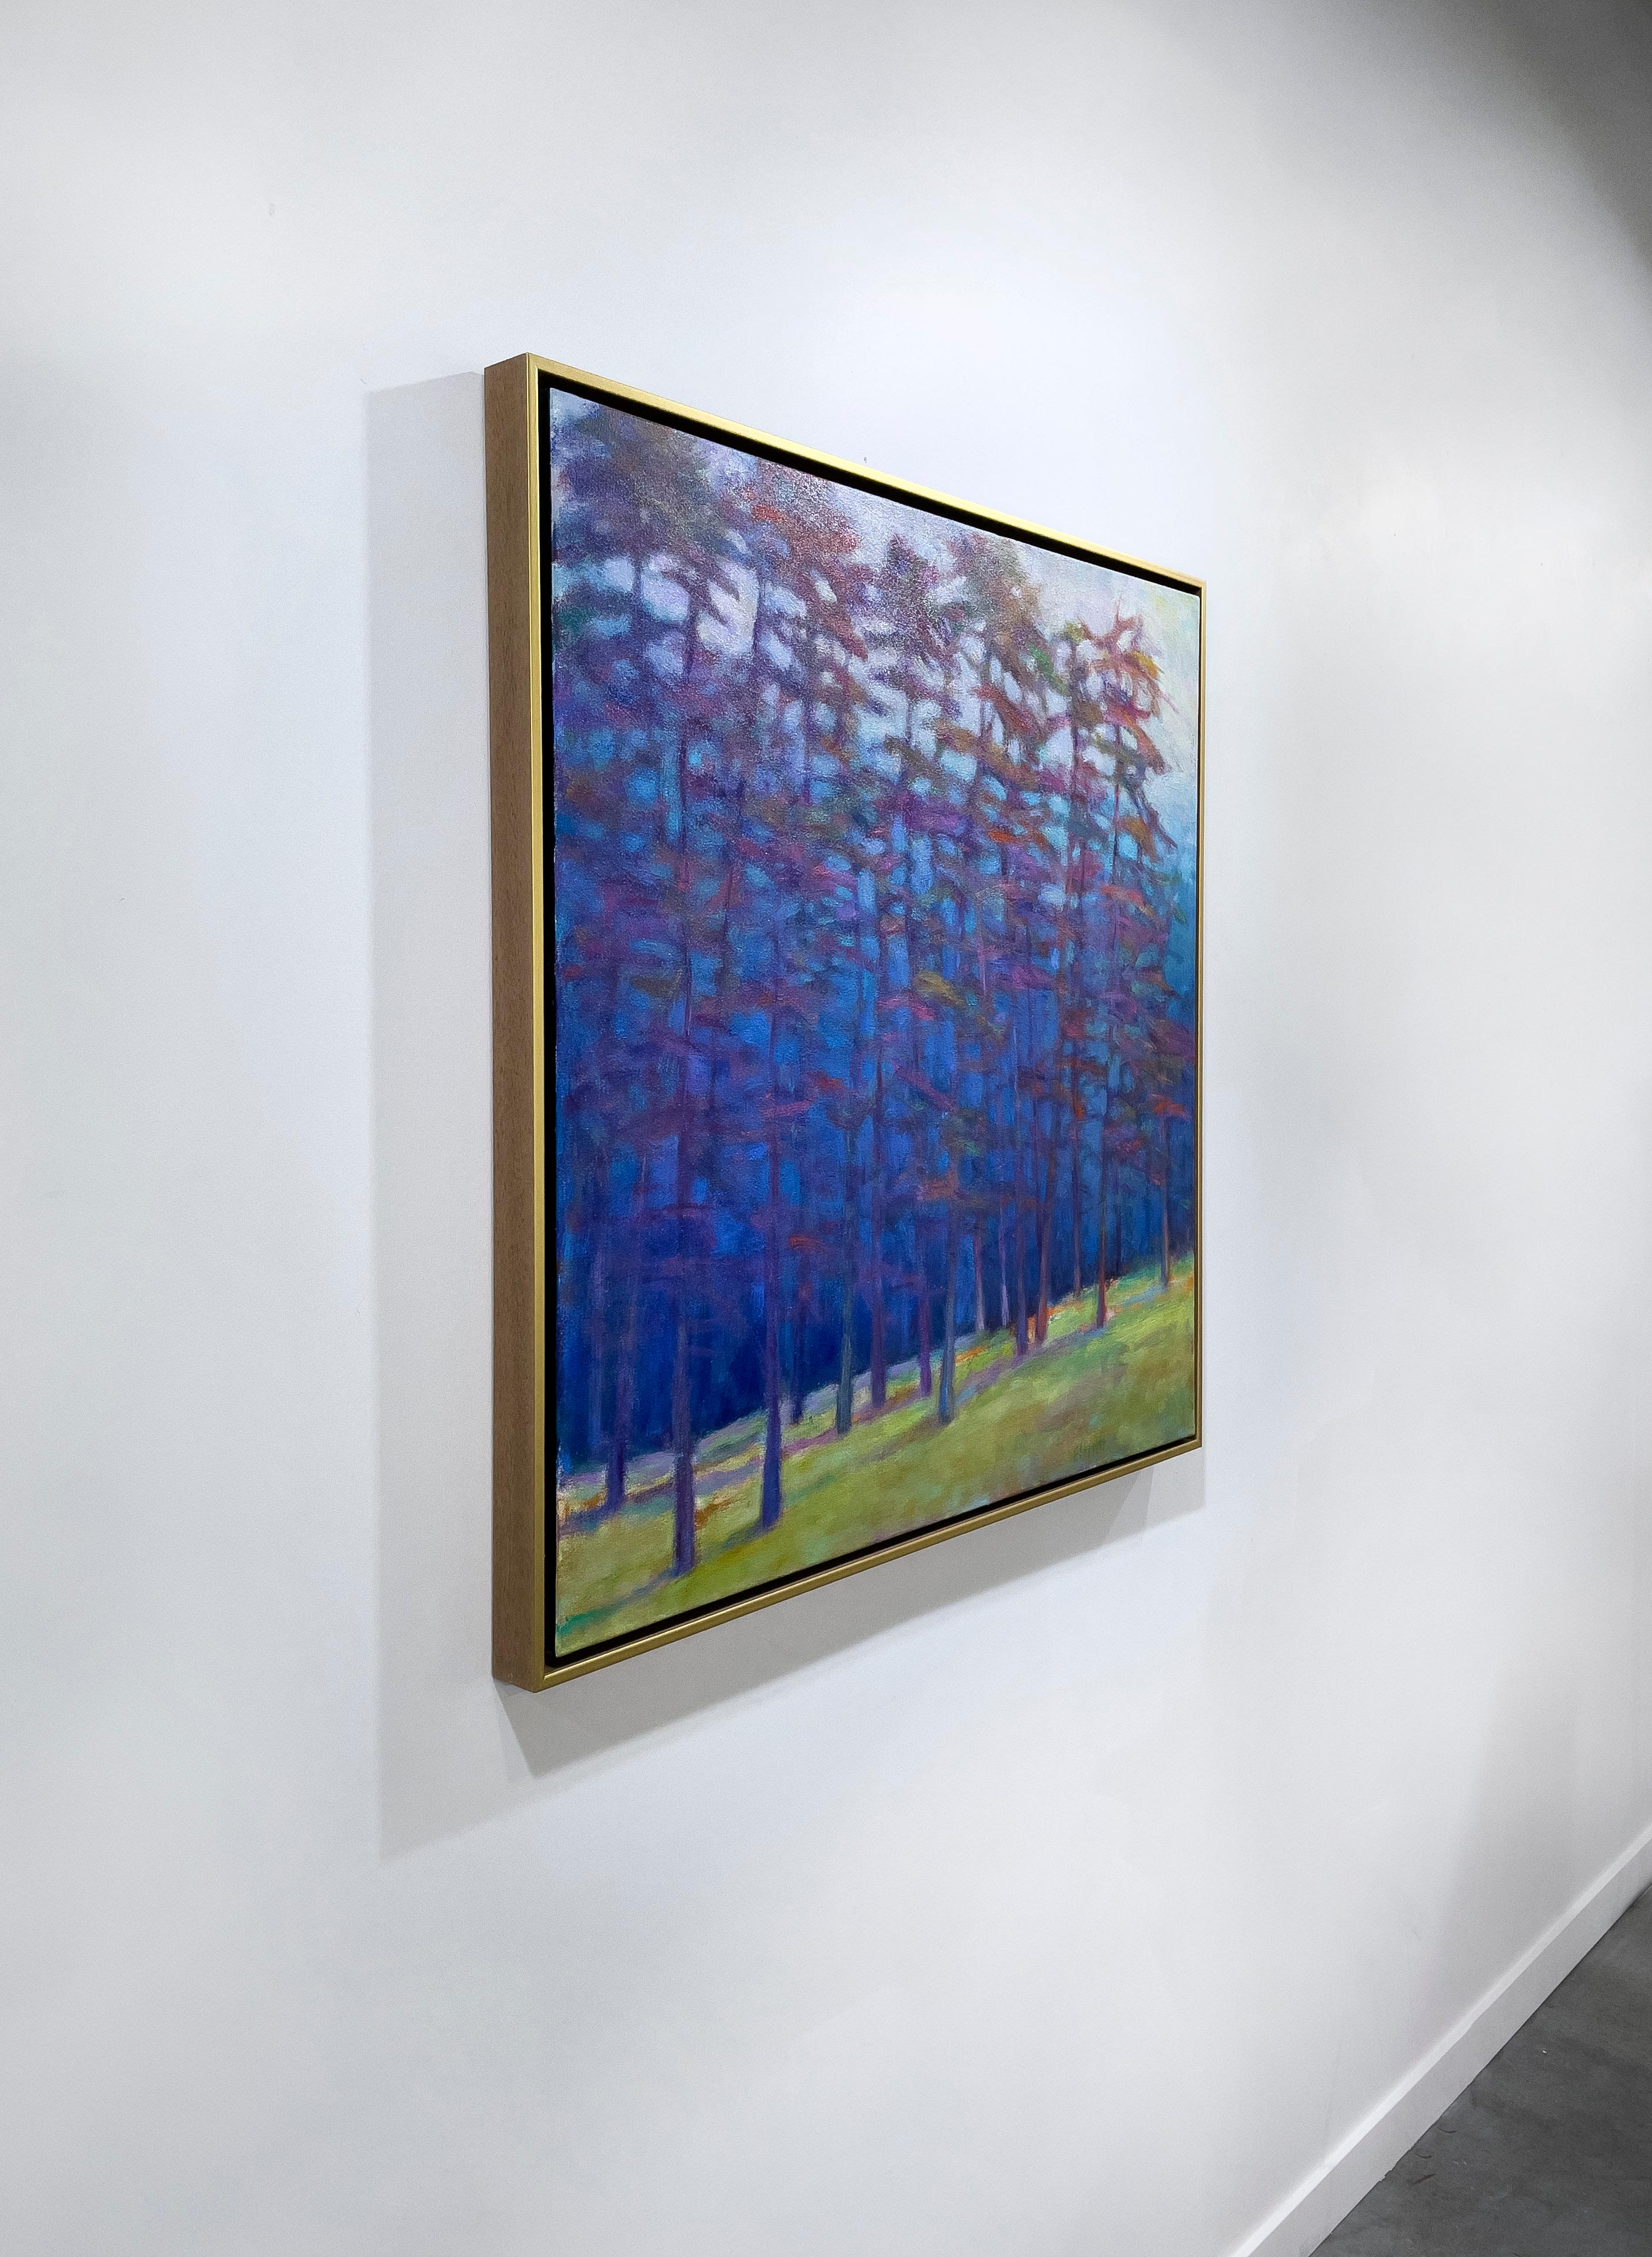 This contemporary abstract landscape painting by Ken Elliott is made with oil paint on canvas. It depicts an abstracted forest-scape, with cool blue and violet trees and a yellow-green forest floor. The cool blues are contrasted by light, saturated